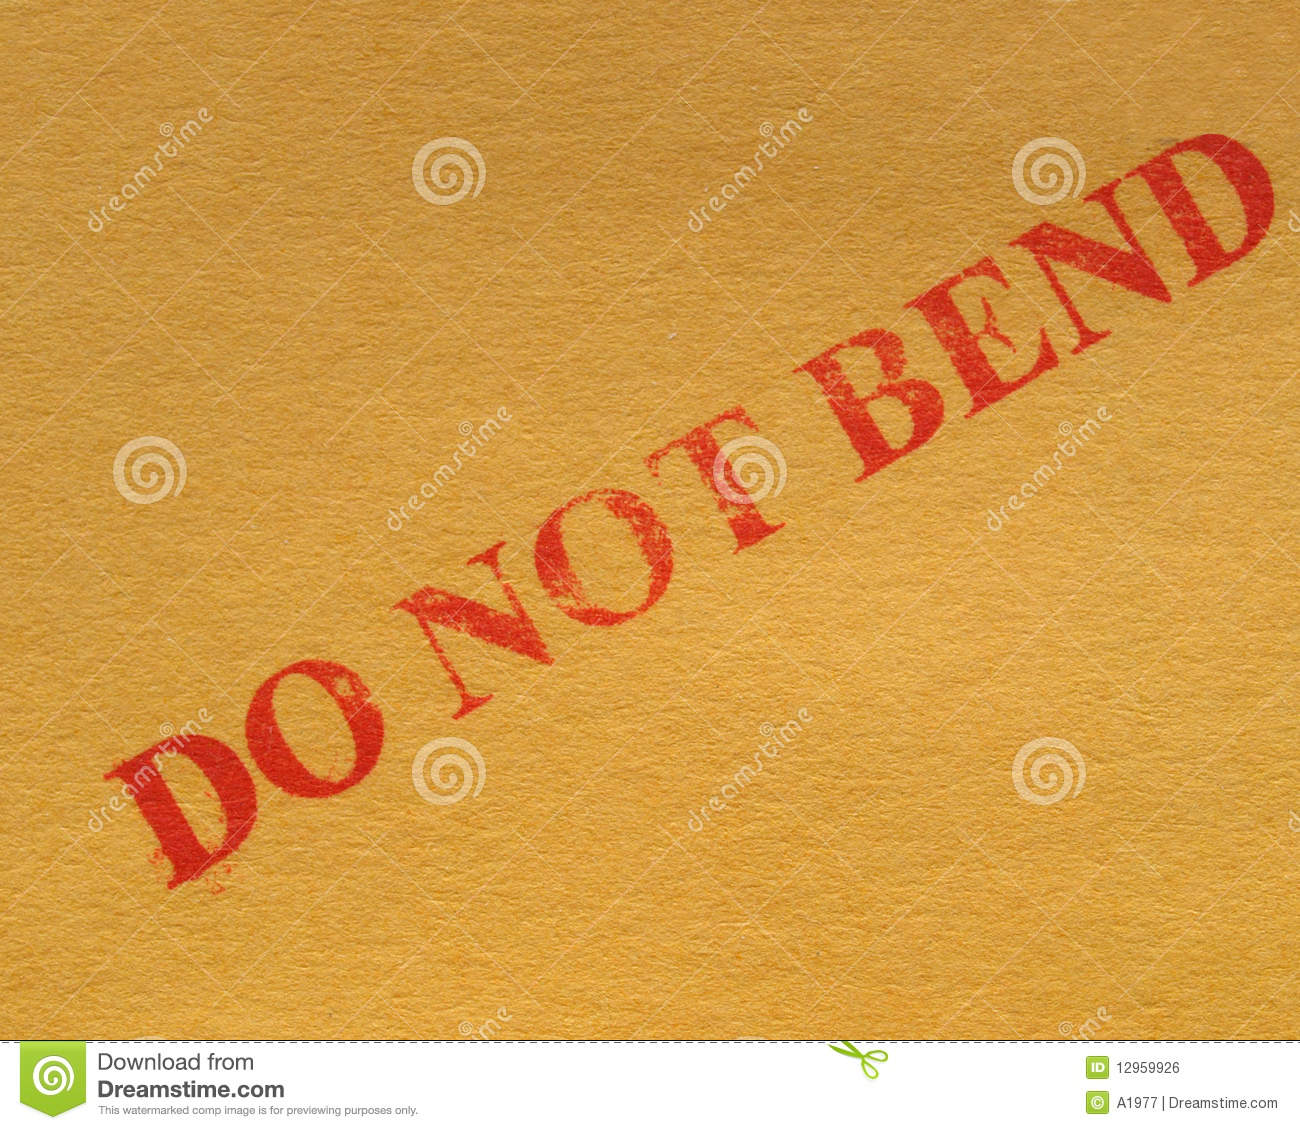 Do Not Bend Royalty Free Stock Image   Image  12959926